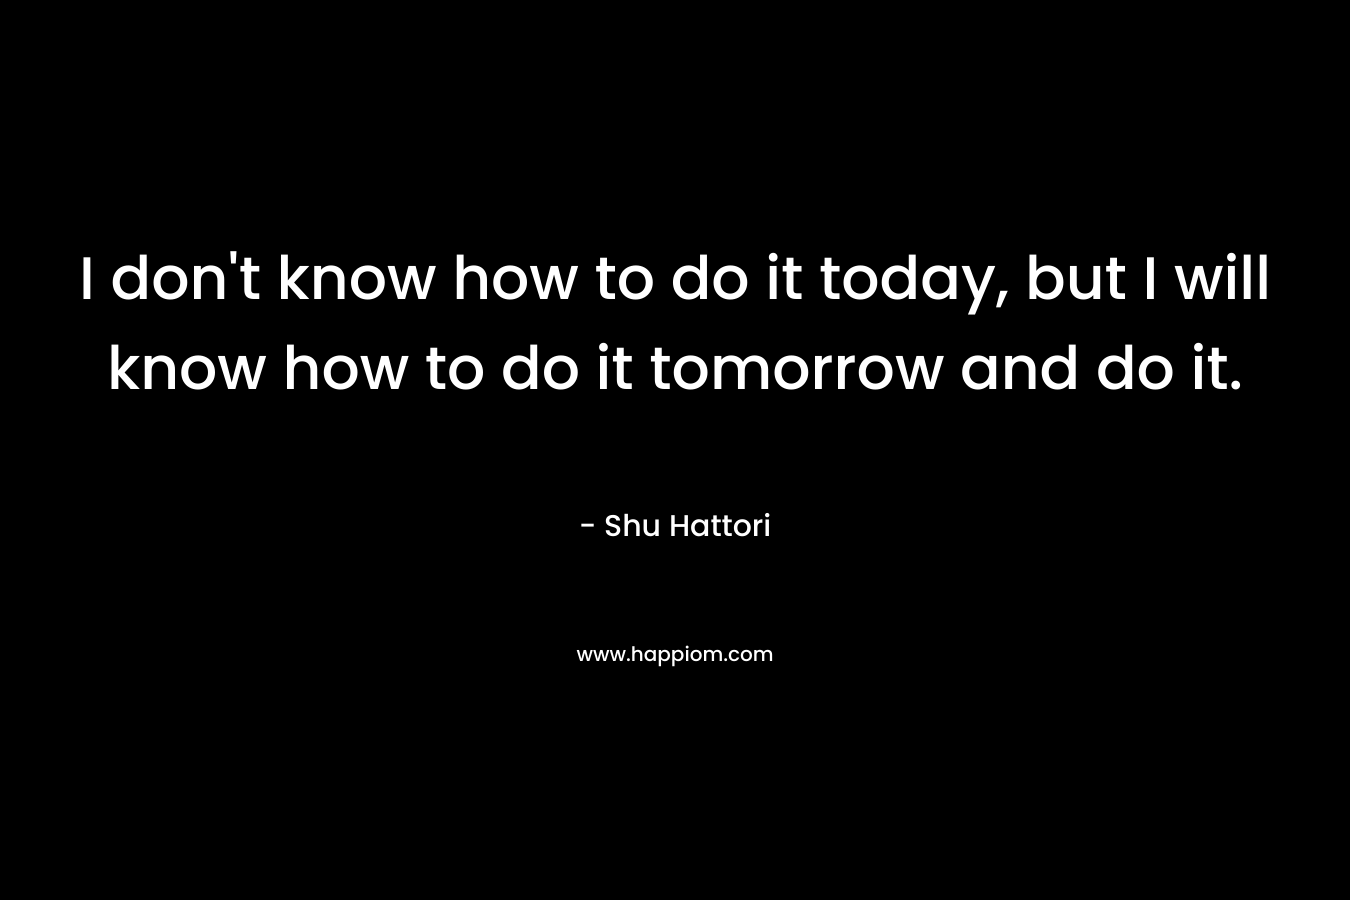 I don’t know how to do it today, but I will know how to do it tomorrow and do it. – Shu Hattori